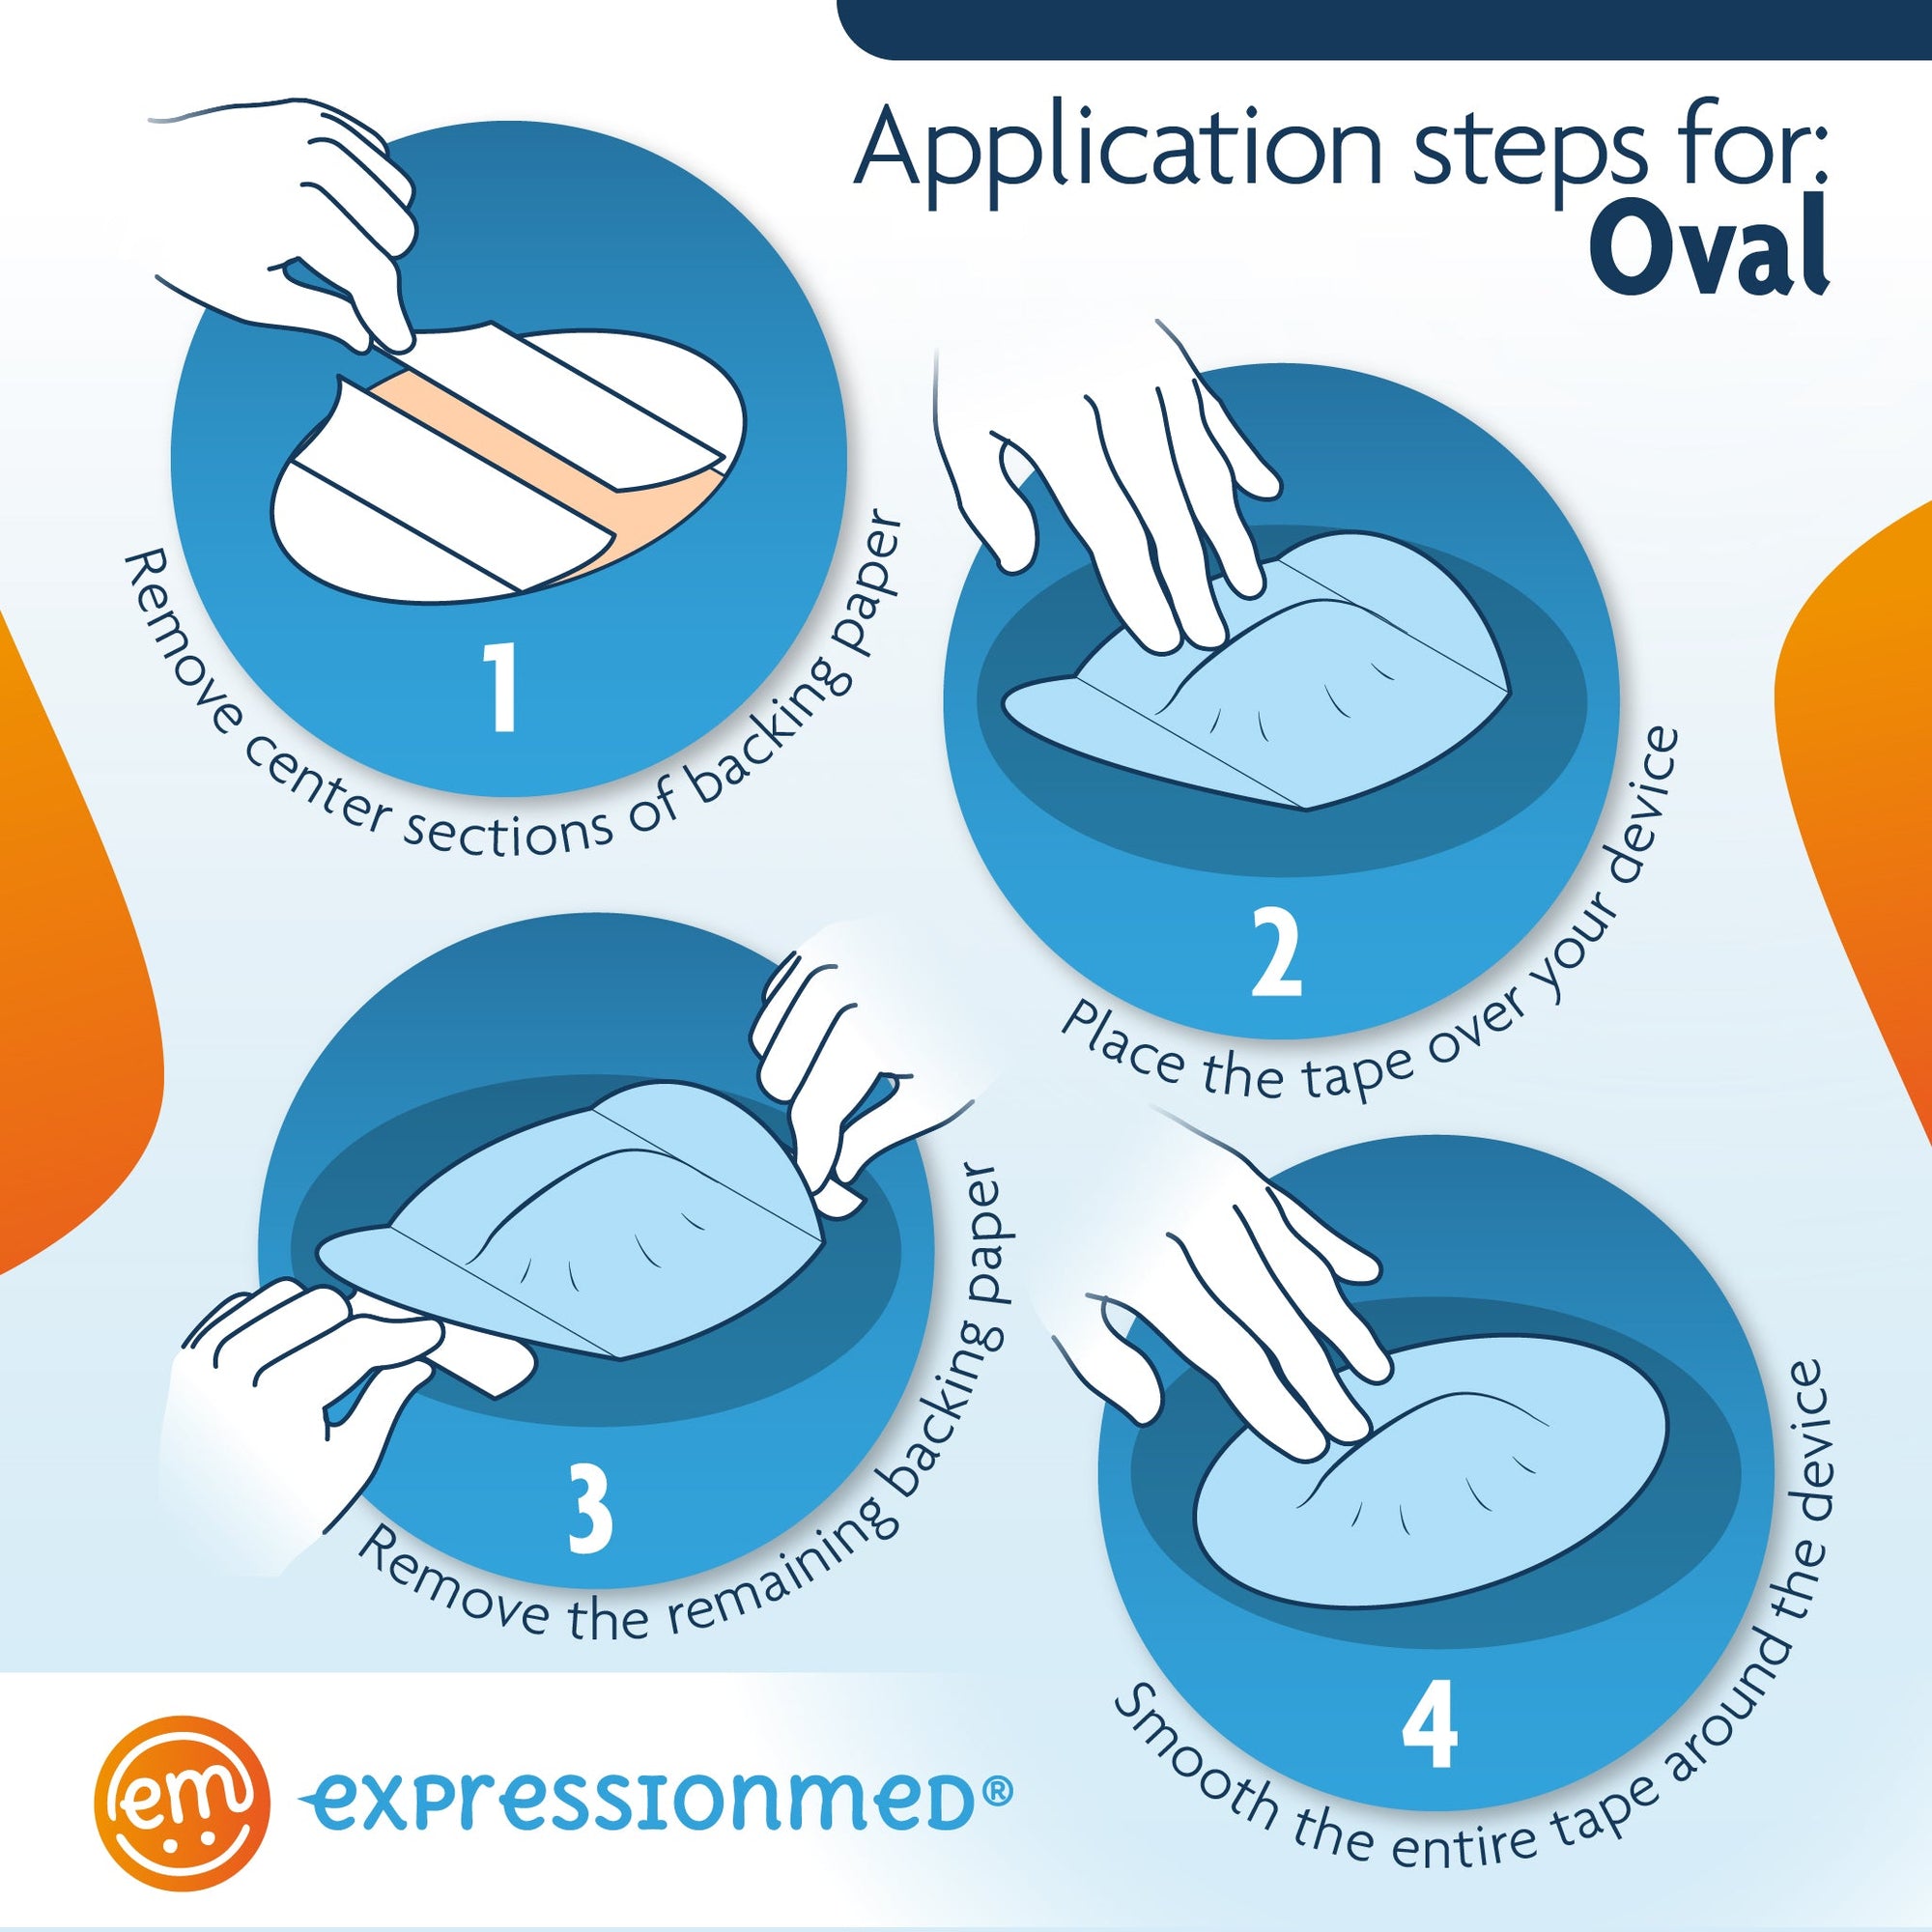 Application Instructions. 1. Prep skin with soap and water. 2. Remove Middle Sections and lay center hole over device. 3. Peel off both end Sectionss and smooth down on skin. To remove, hold an edge and stretch material off skin.